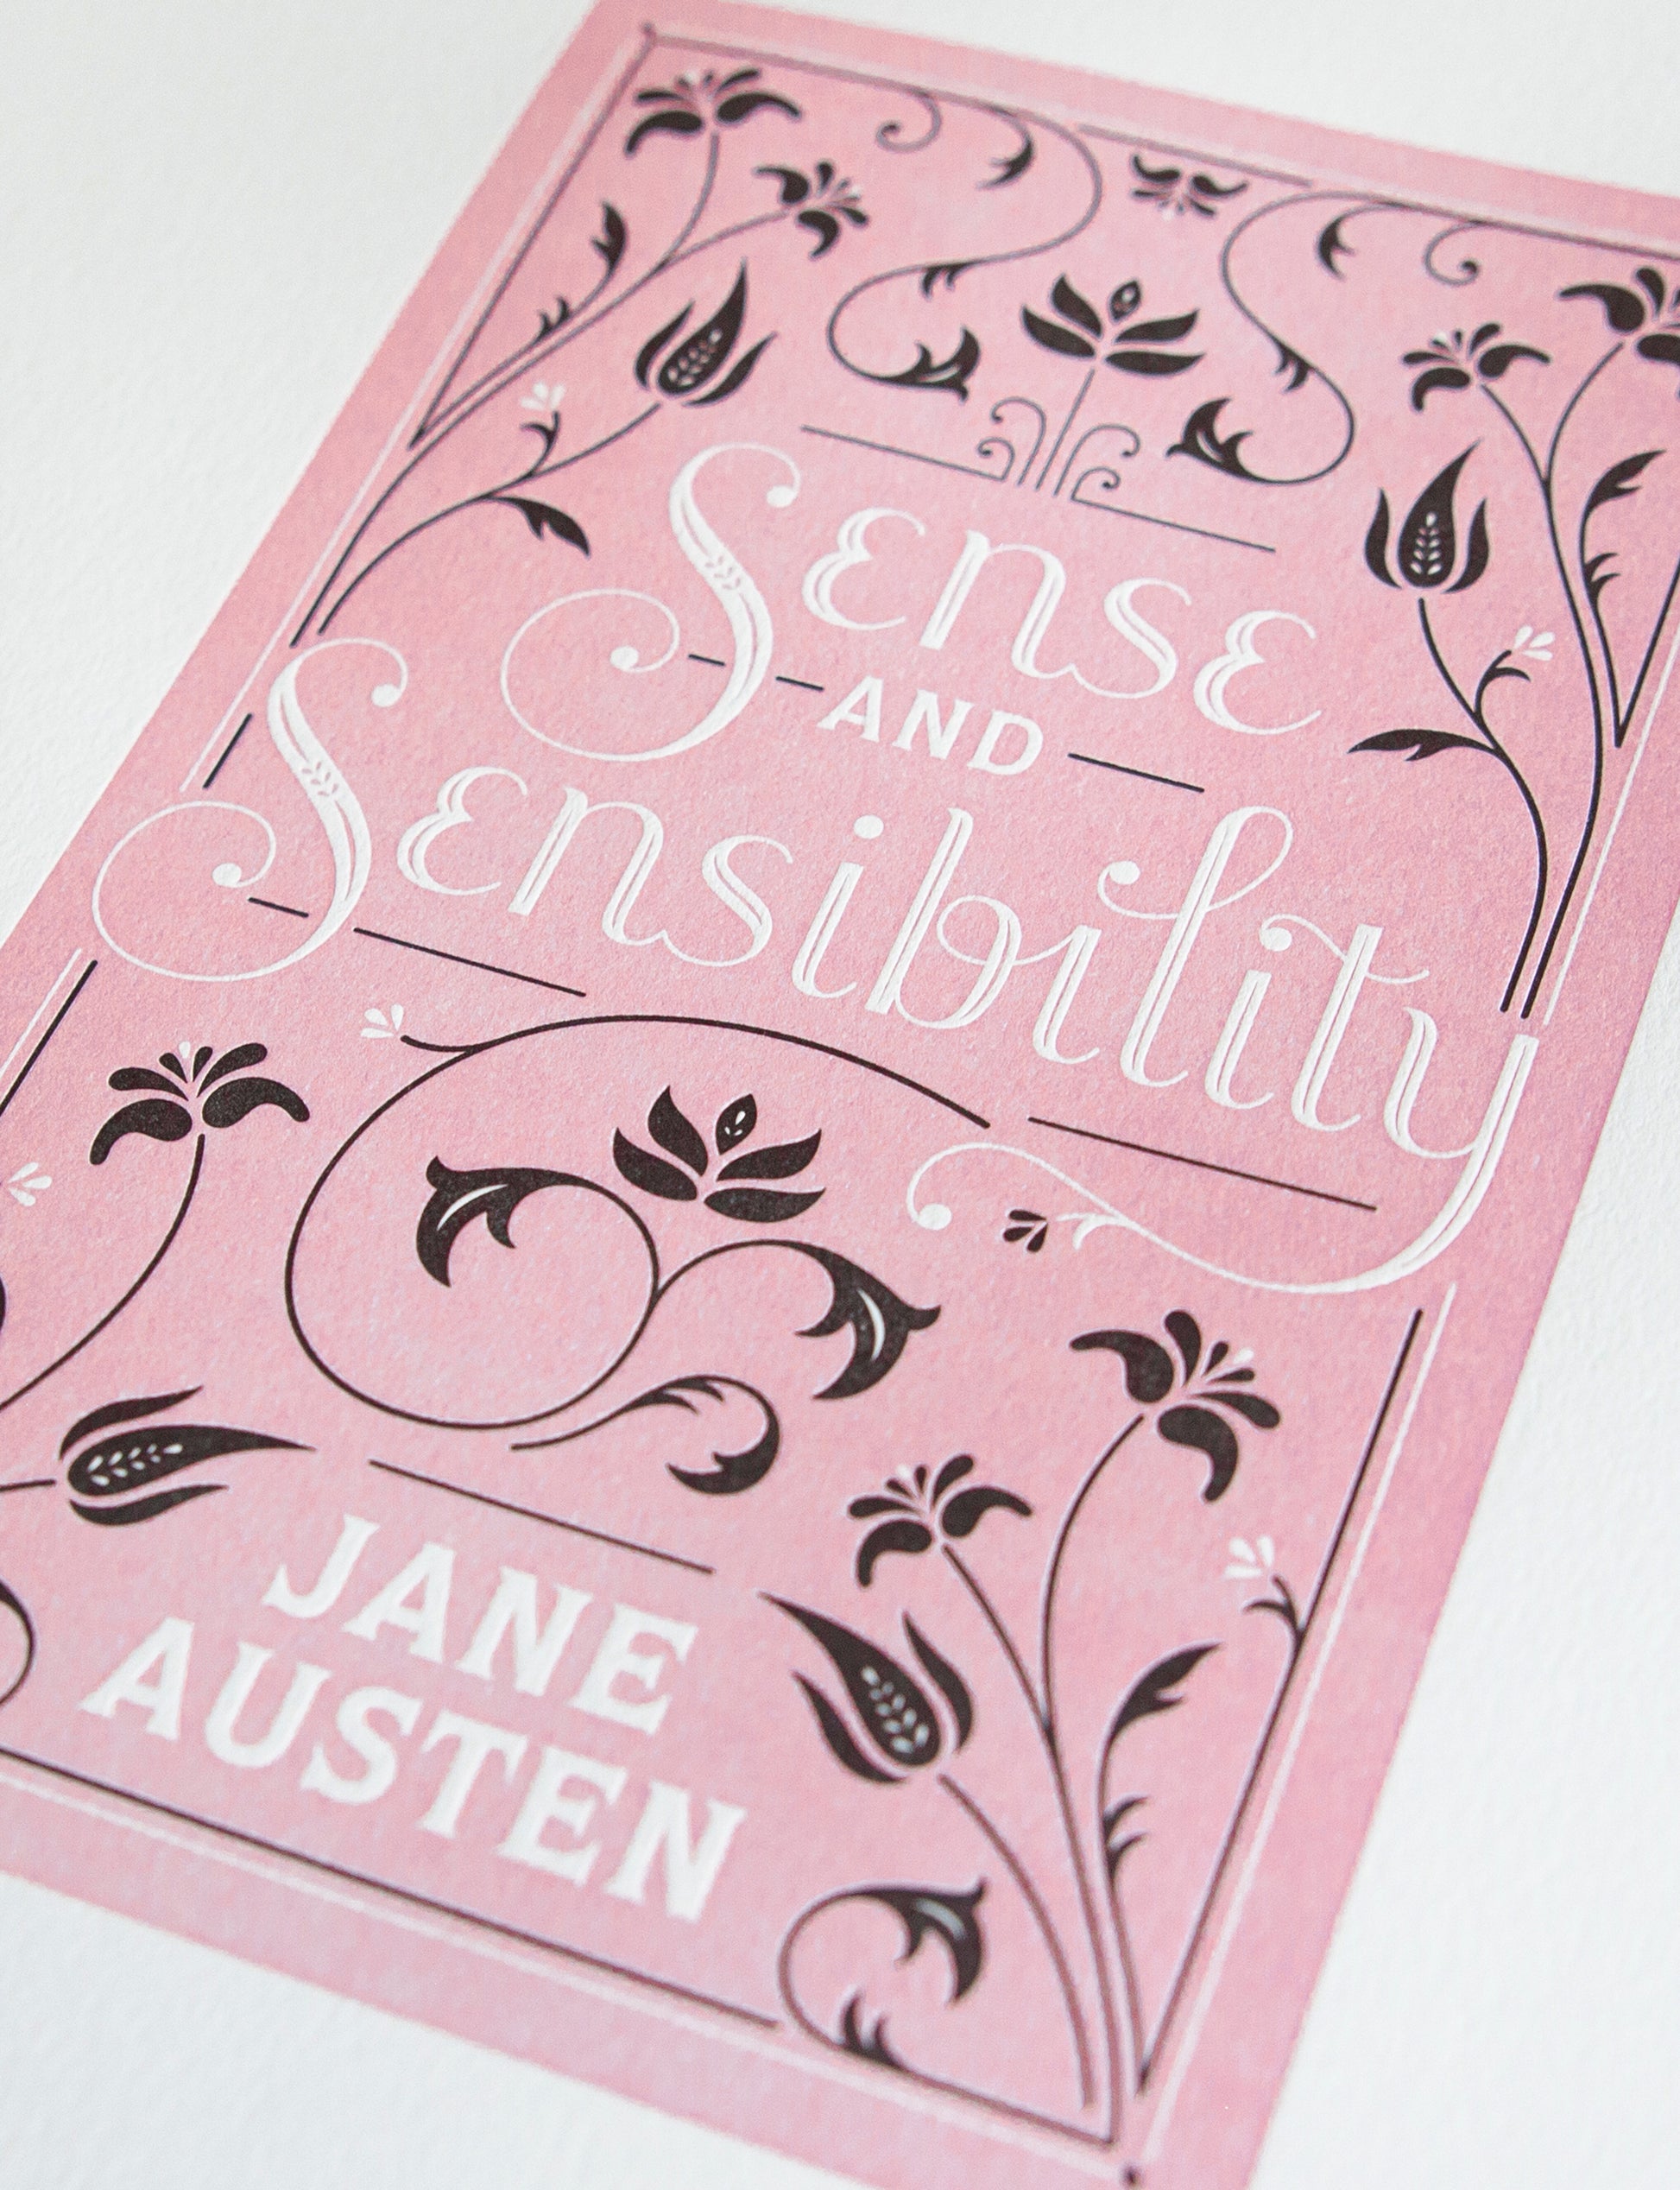 Close-up of a 2-color letterpress print in pink and black. Printed artwork is an illustrated book cover of Sense and Sensibility including custom hand lettering.